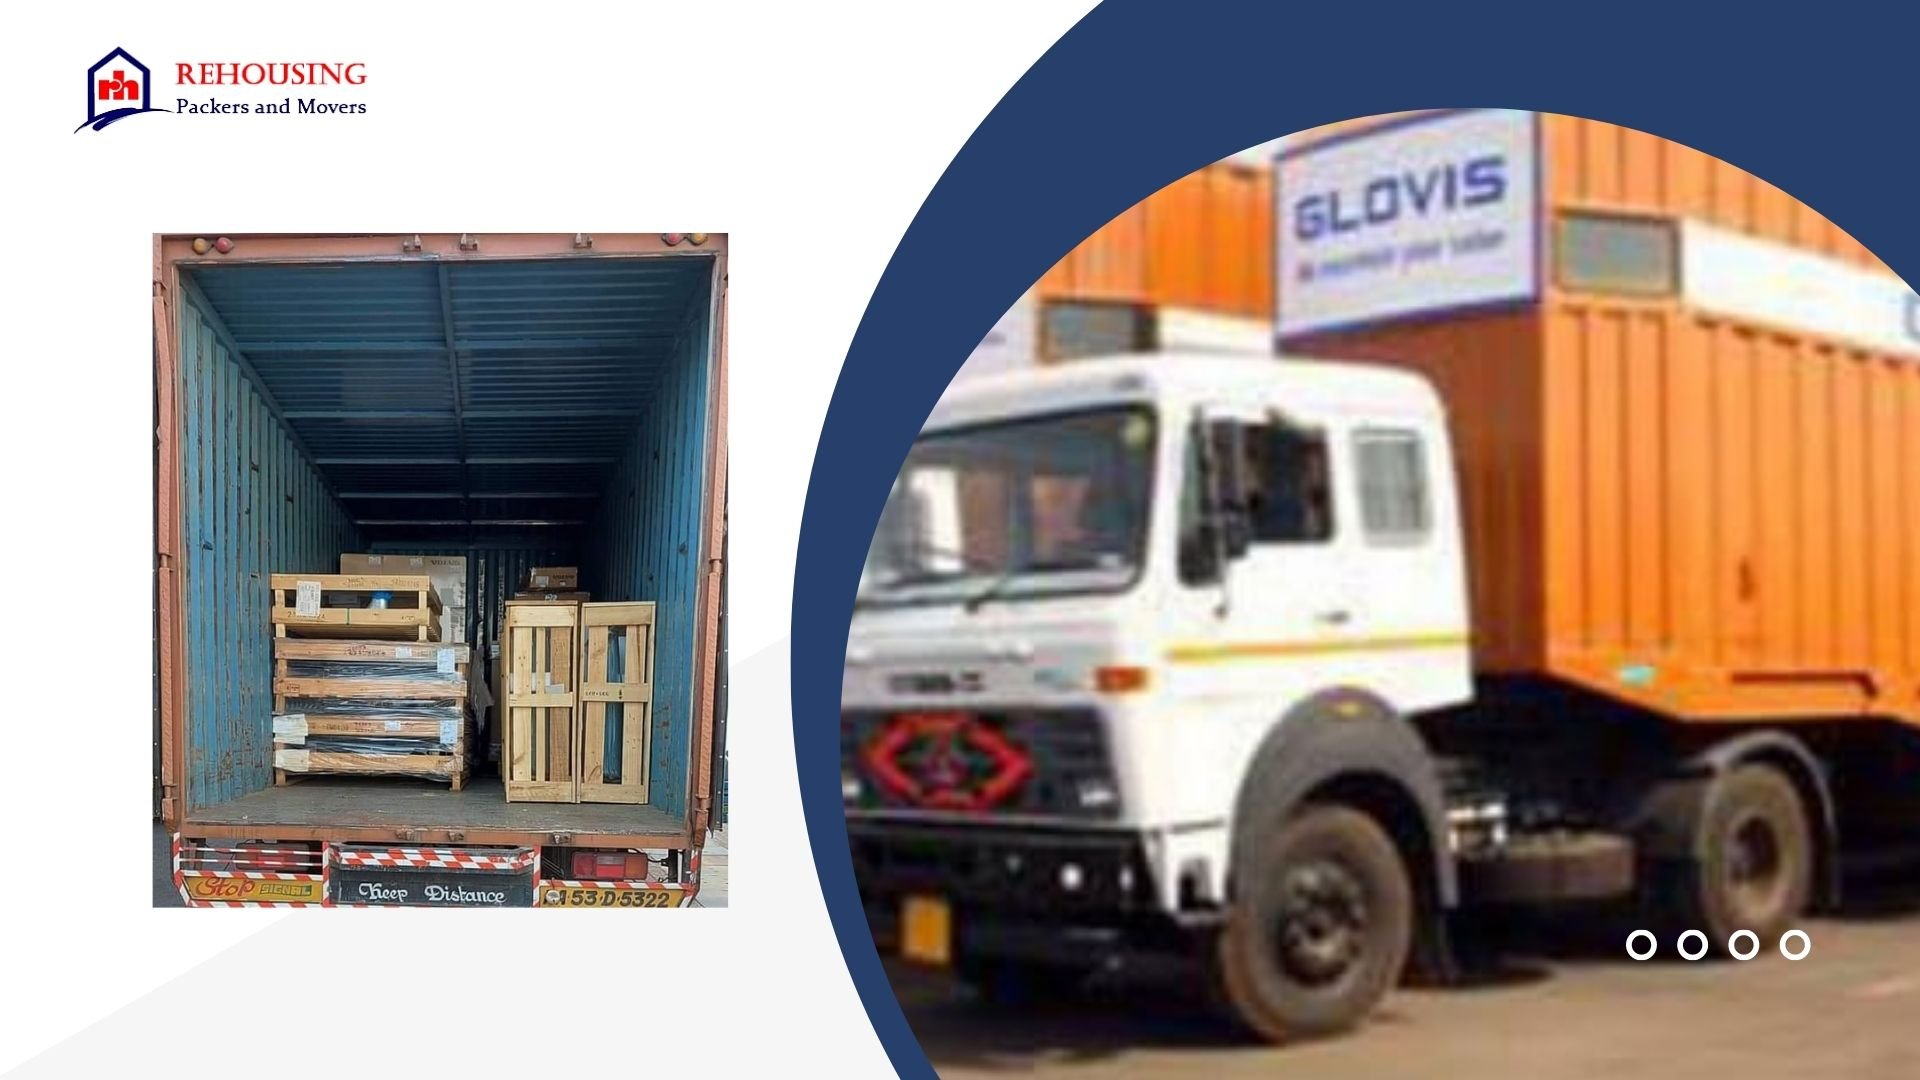 Packers and Movers From Dehradun to Mumbai | Rehousing packers and movers